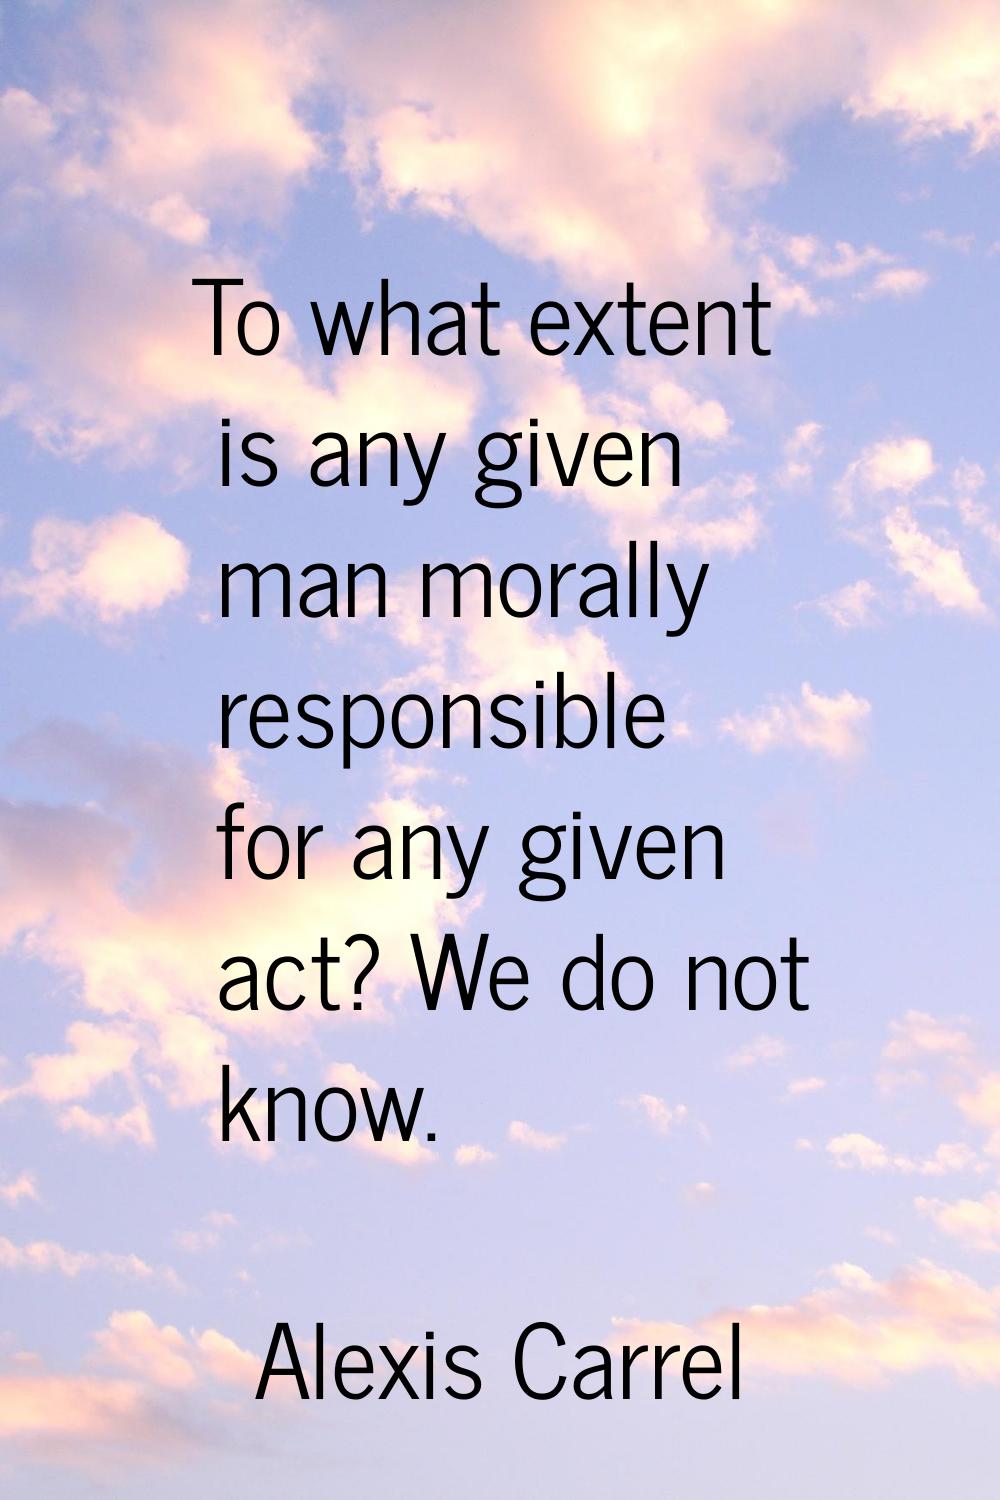 To what extent is any given man morally responsible for any given act? We do not know.